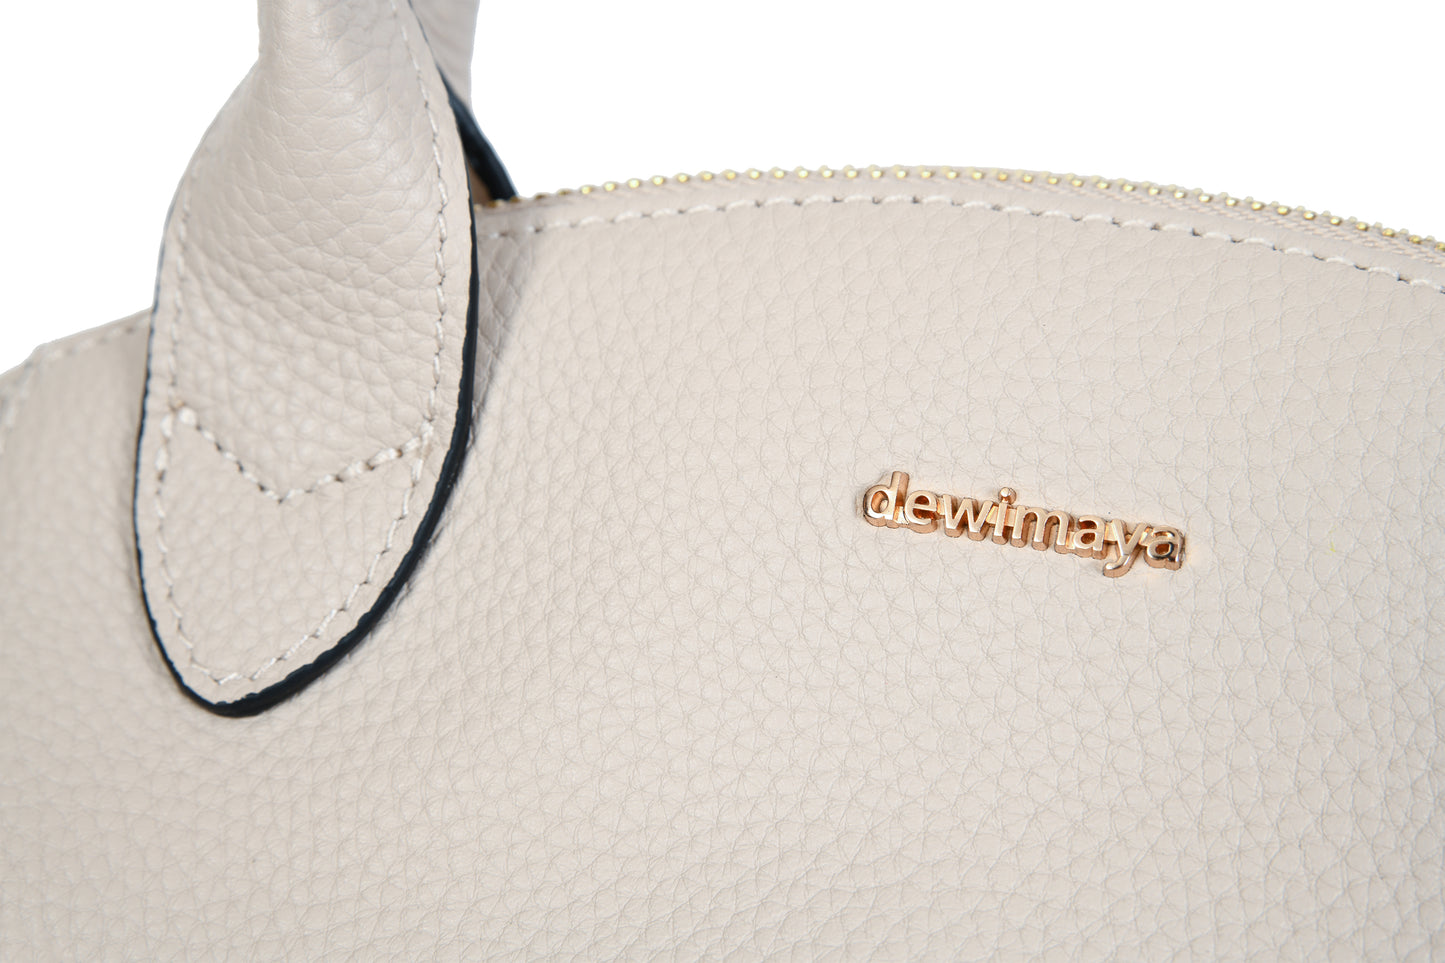 Bali Pebble Grain Leather Cream White Handbag made by Dewi Maya gold logo and stitching available at the best boutique in Upstate South Carolina Spartanburg Greenville Dewi Maya Boutique